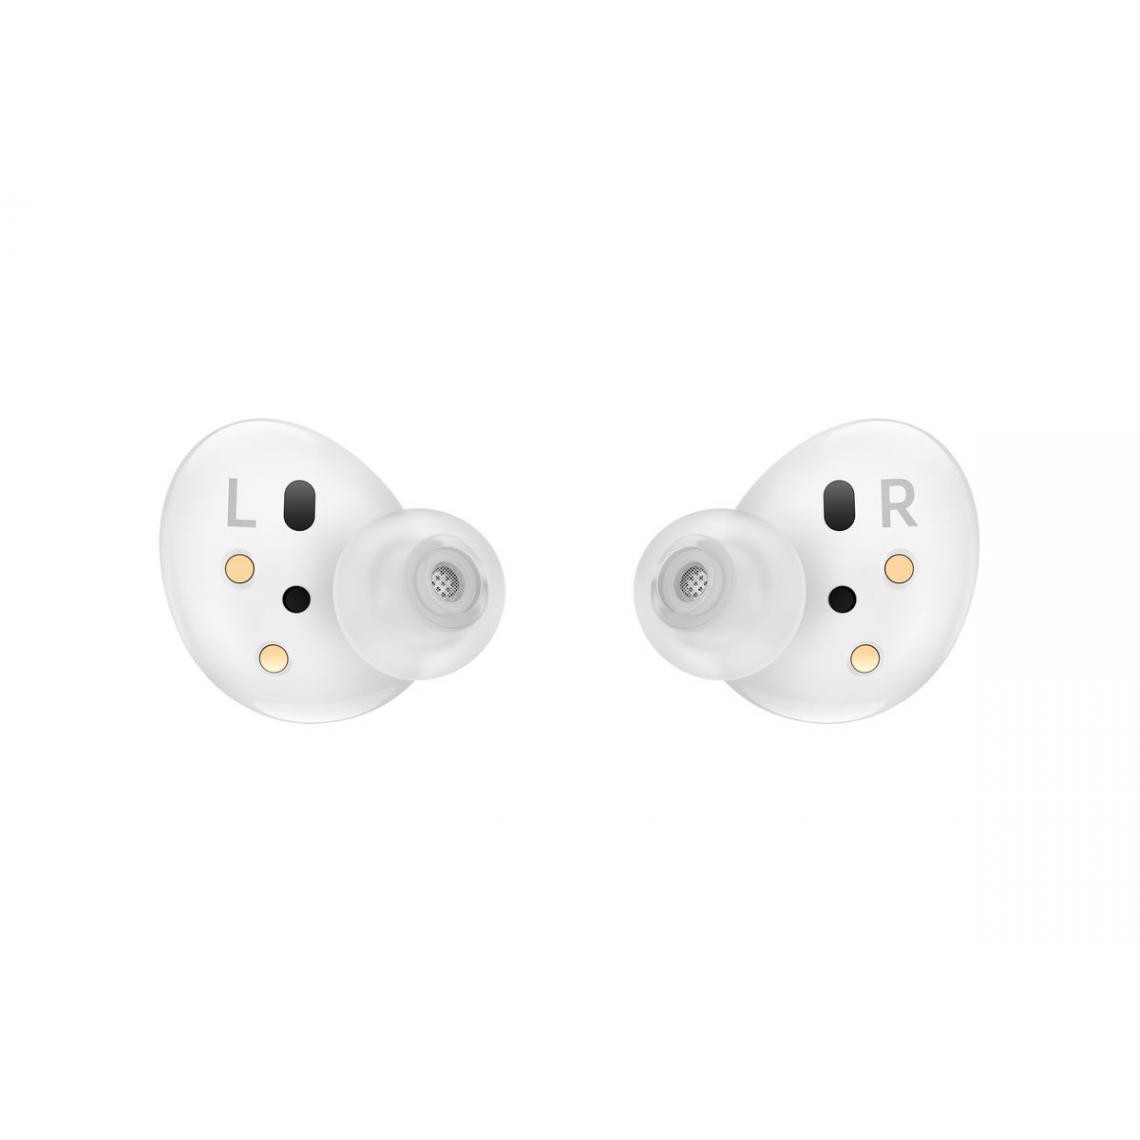 Samsung - Galaxy Buds2 - Ecouteurs True Wireless - Blanc - Ecouteurs intra-auriculaires